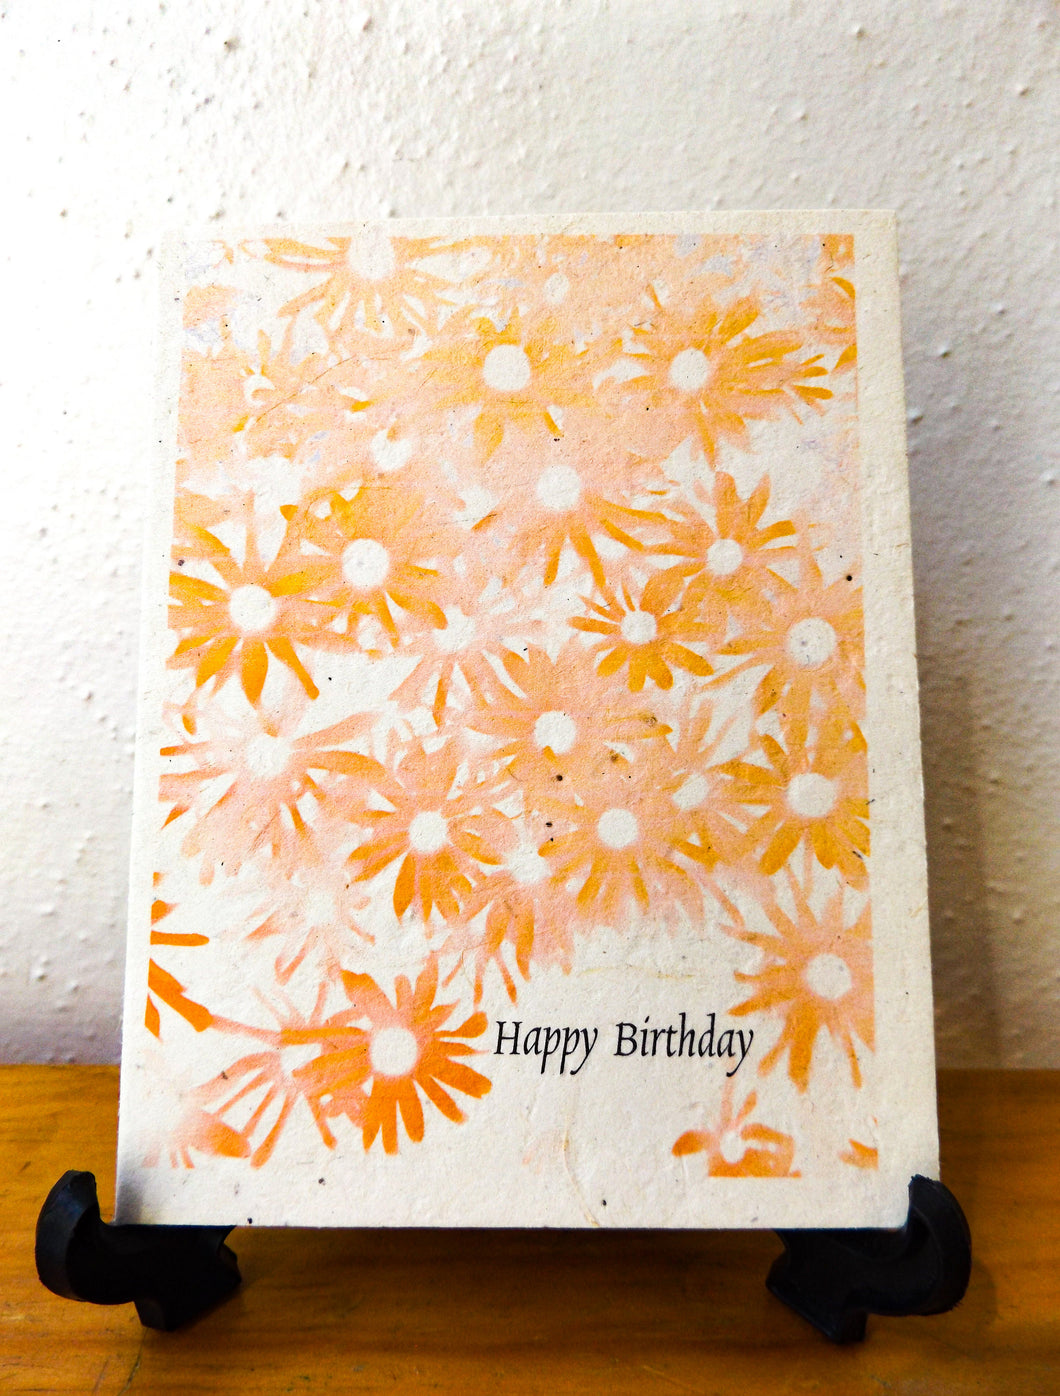 Happy Birthday Plantable Seed Card || WIldflower Seed Paper || Supports Women || Eco- Friendly